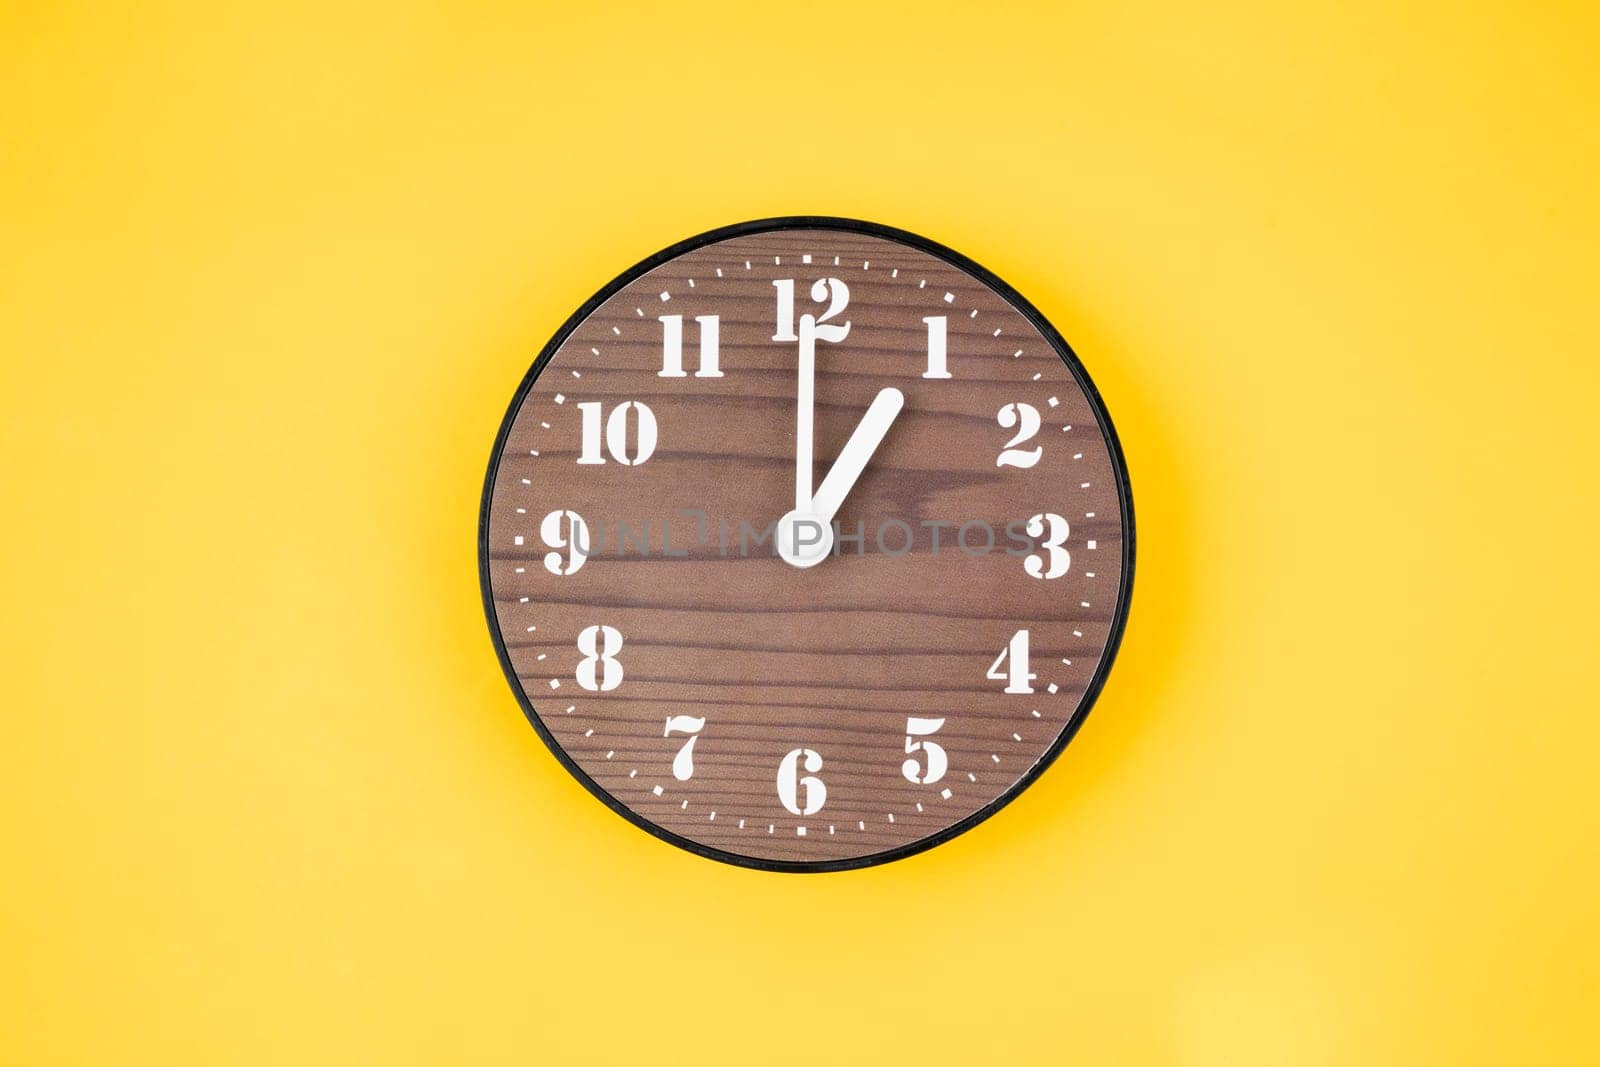 Retro wooden clock at 1 O' clock on yellow color background.